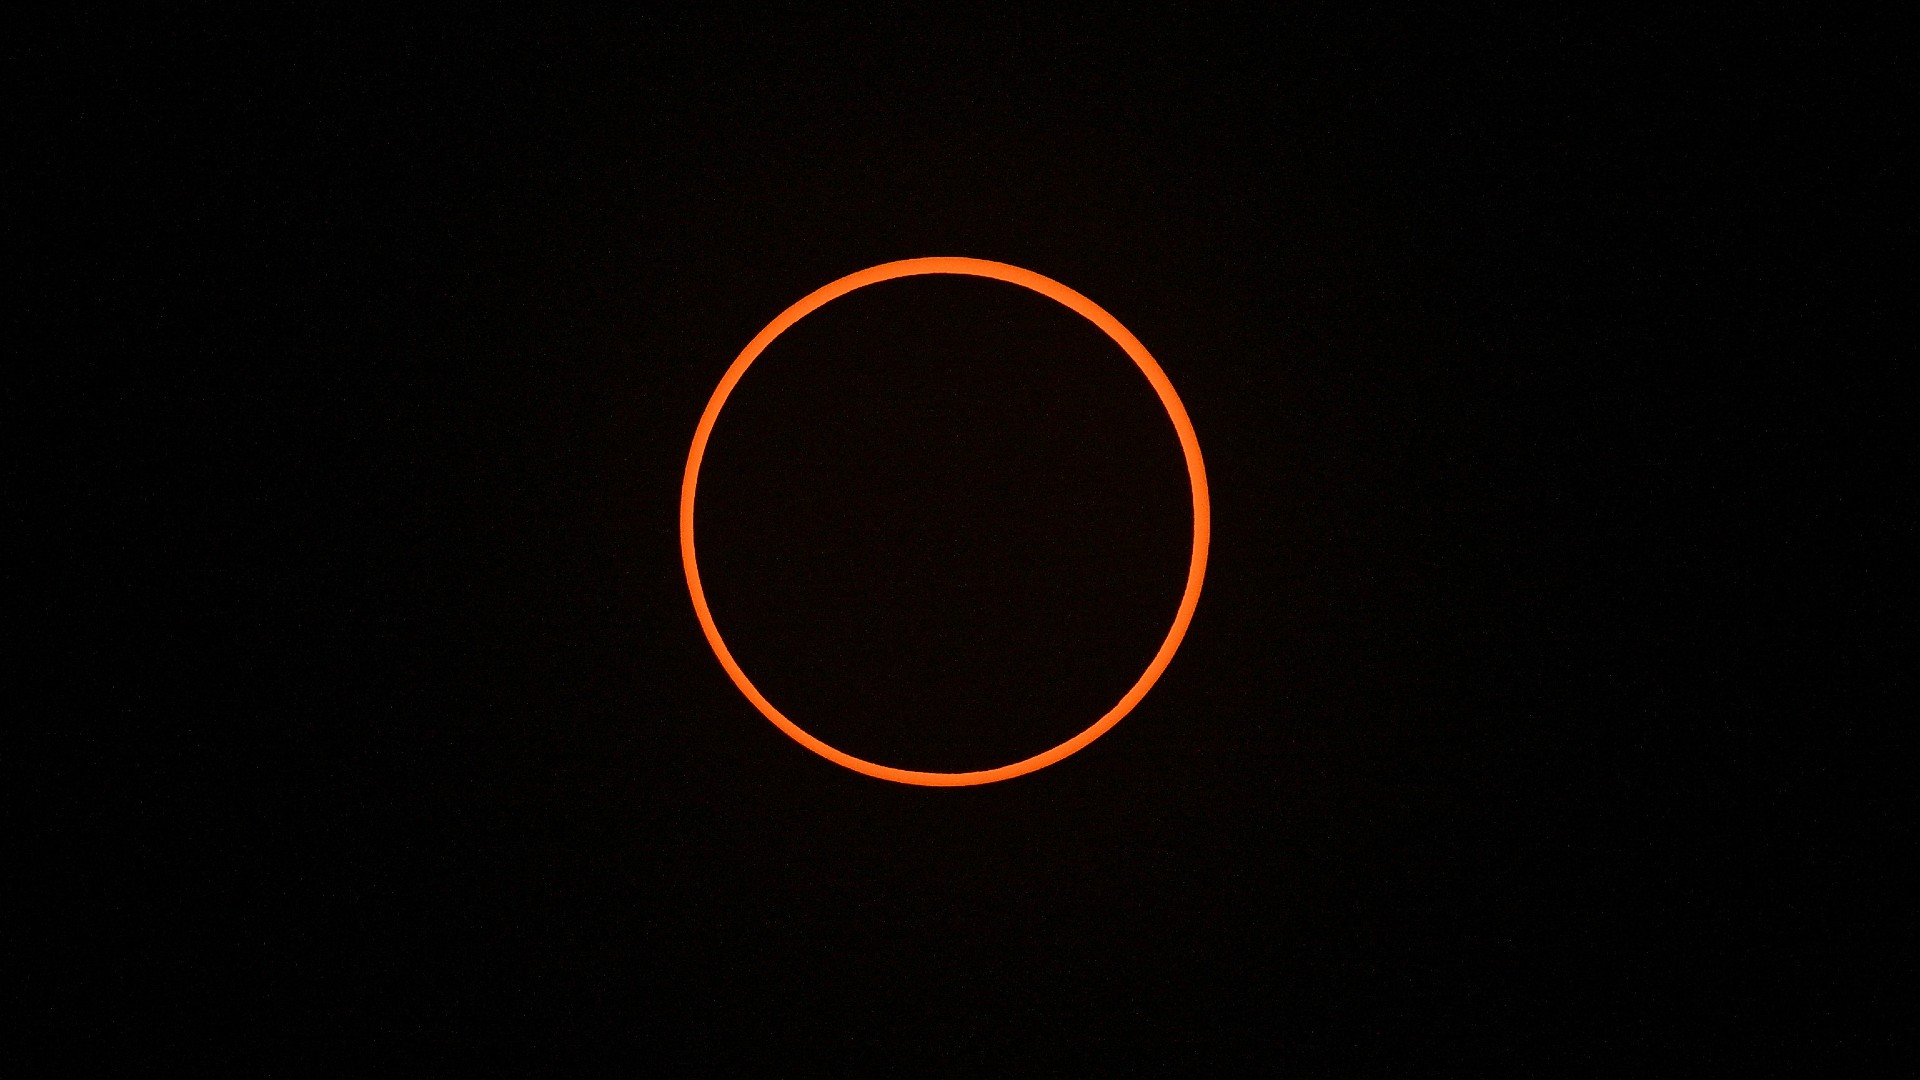 A thin orange band circles a round black shadow as the moon covers most of the sun during the Oct. 14 eclipse